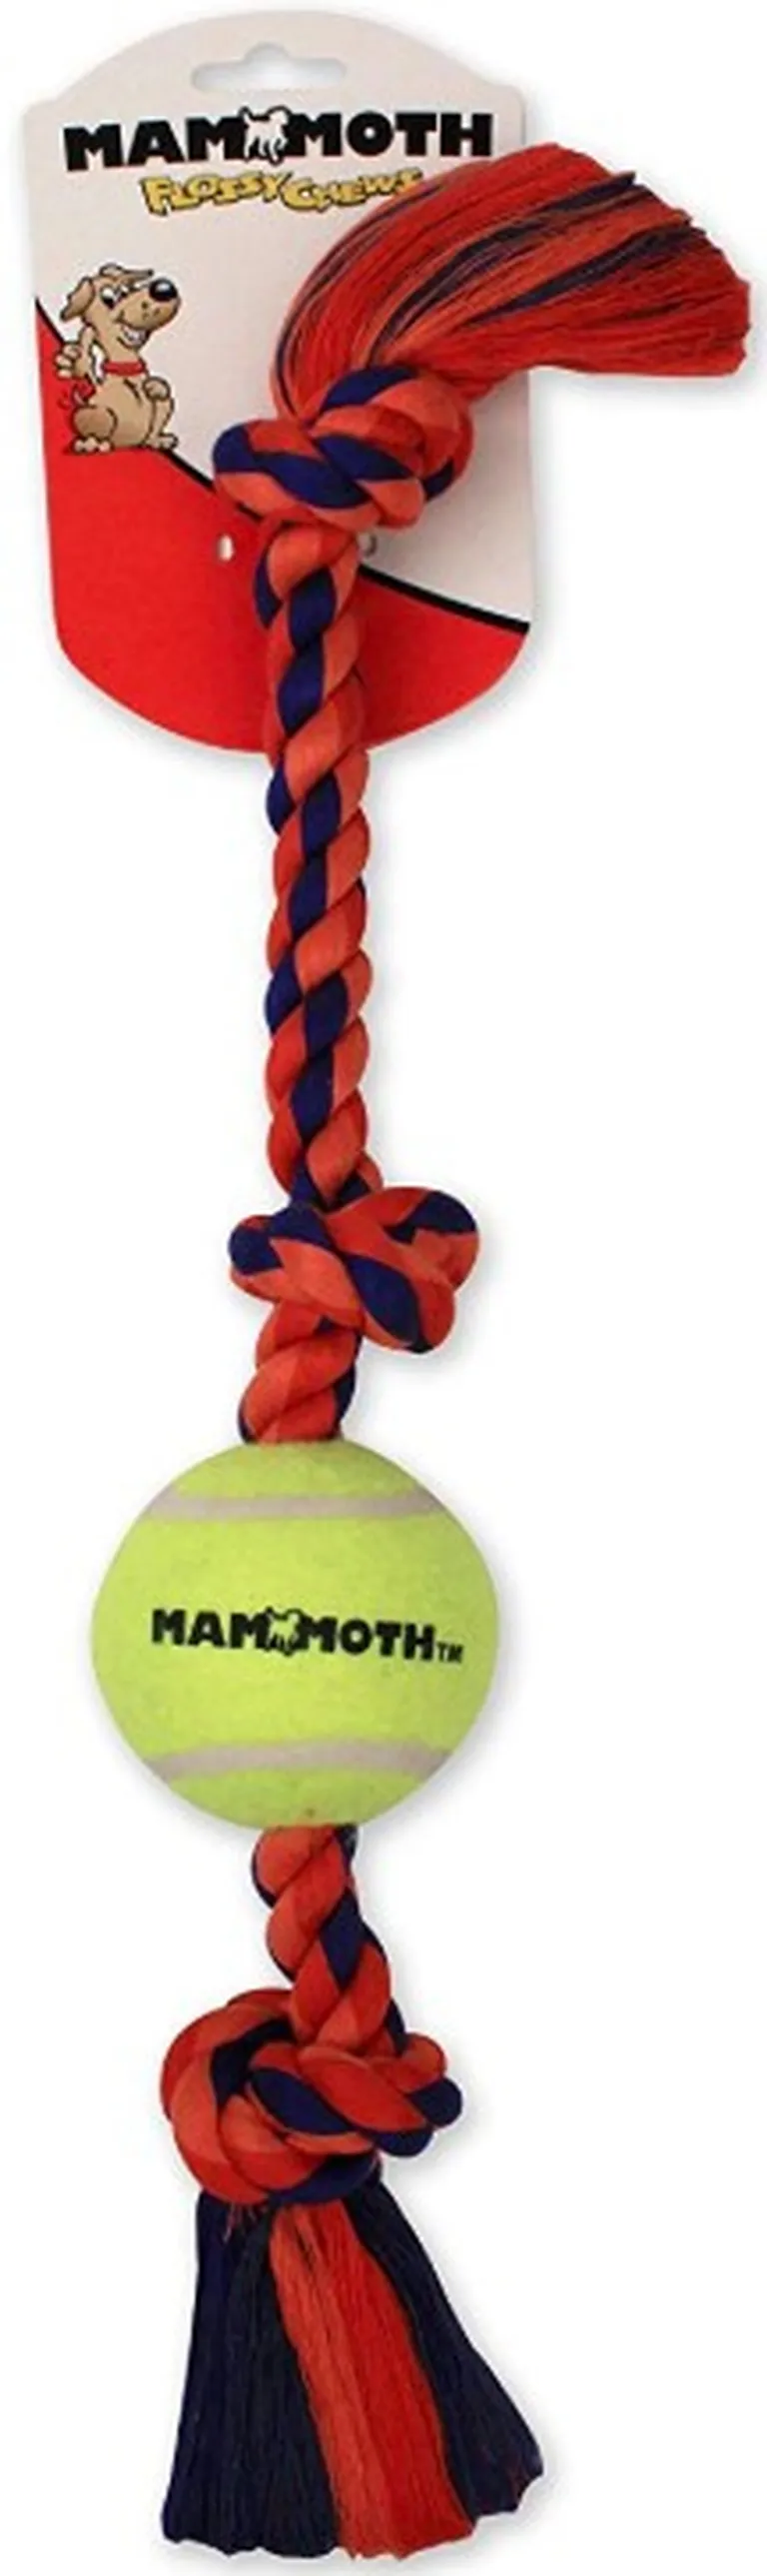 Mammoth Pet Flossy Chews Color 3 Knot Tug with Tennis Ball Mini Assorted Colors Photo 1